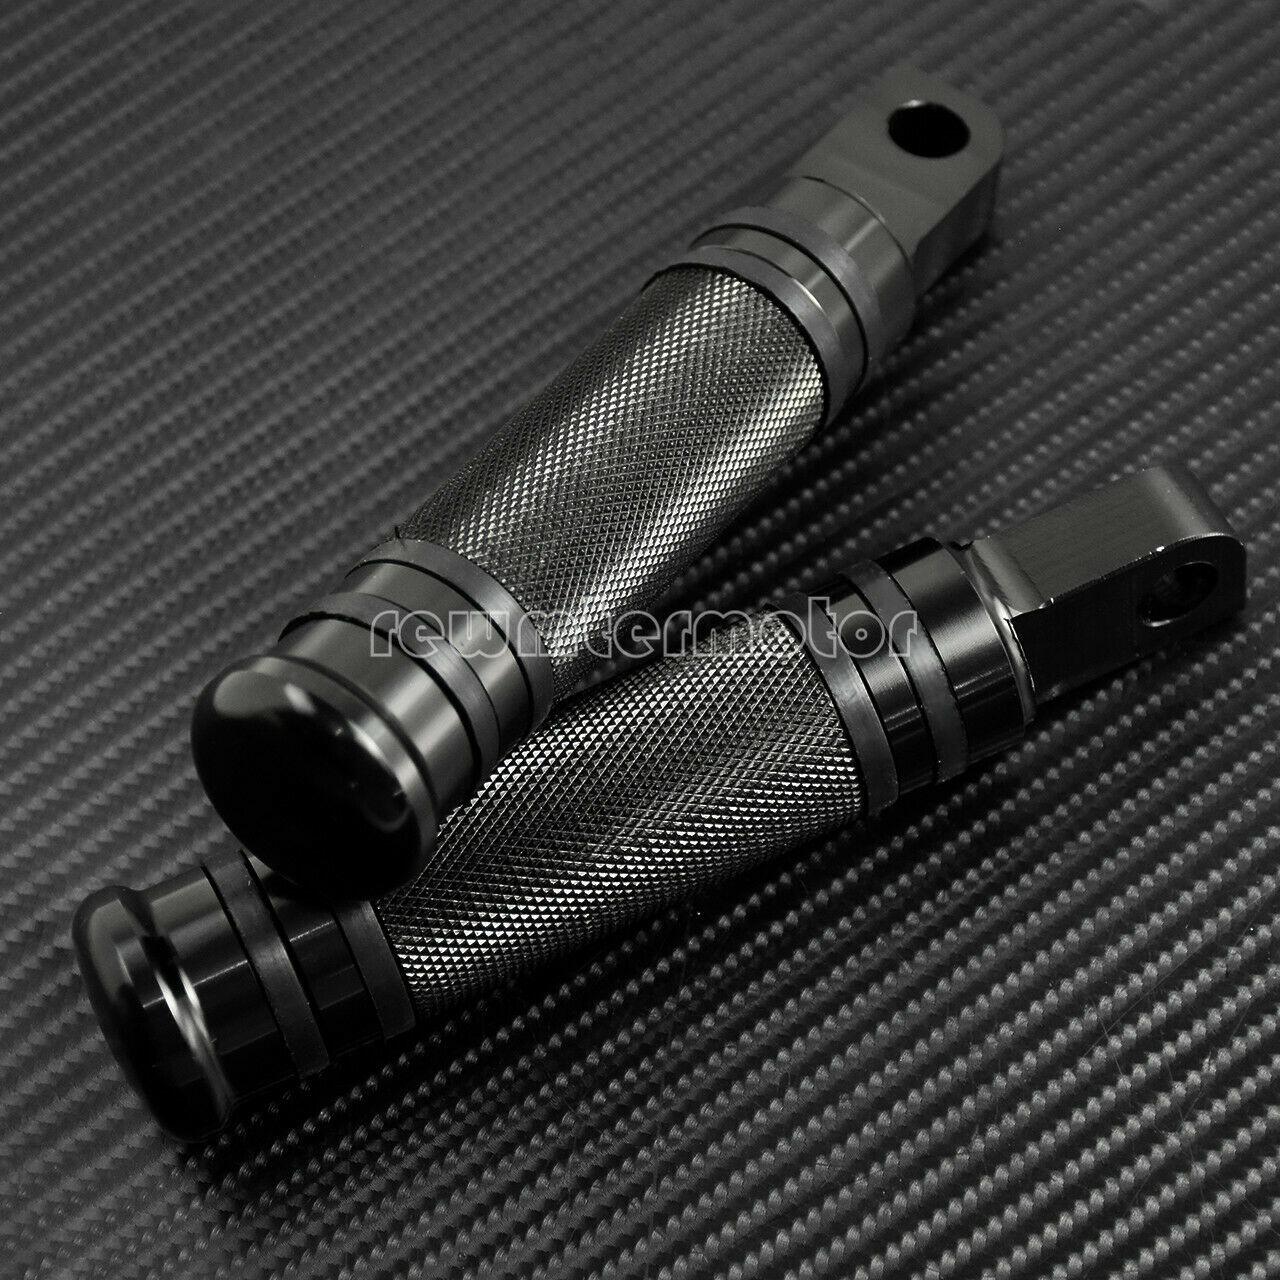 Knurled Rear Front Foot Pegs + Mounting Kit Fit For Harley Sportster Touring - Moto Life Products